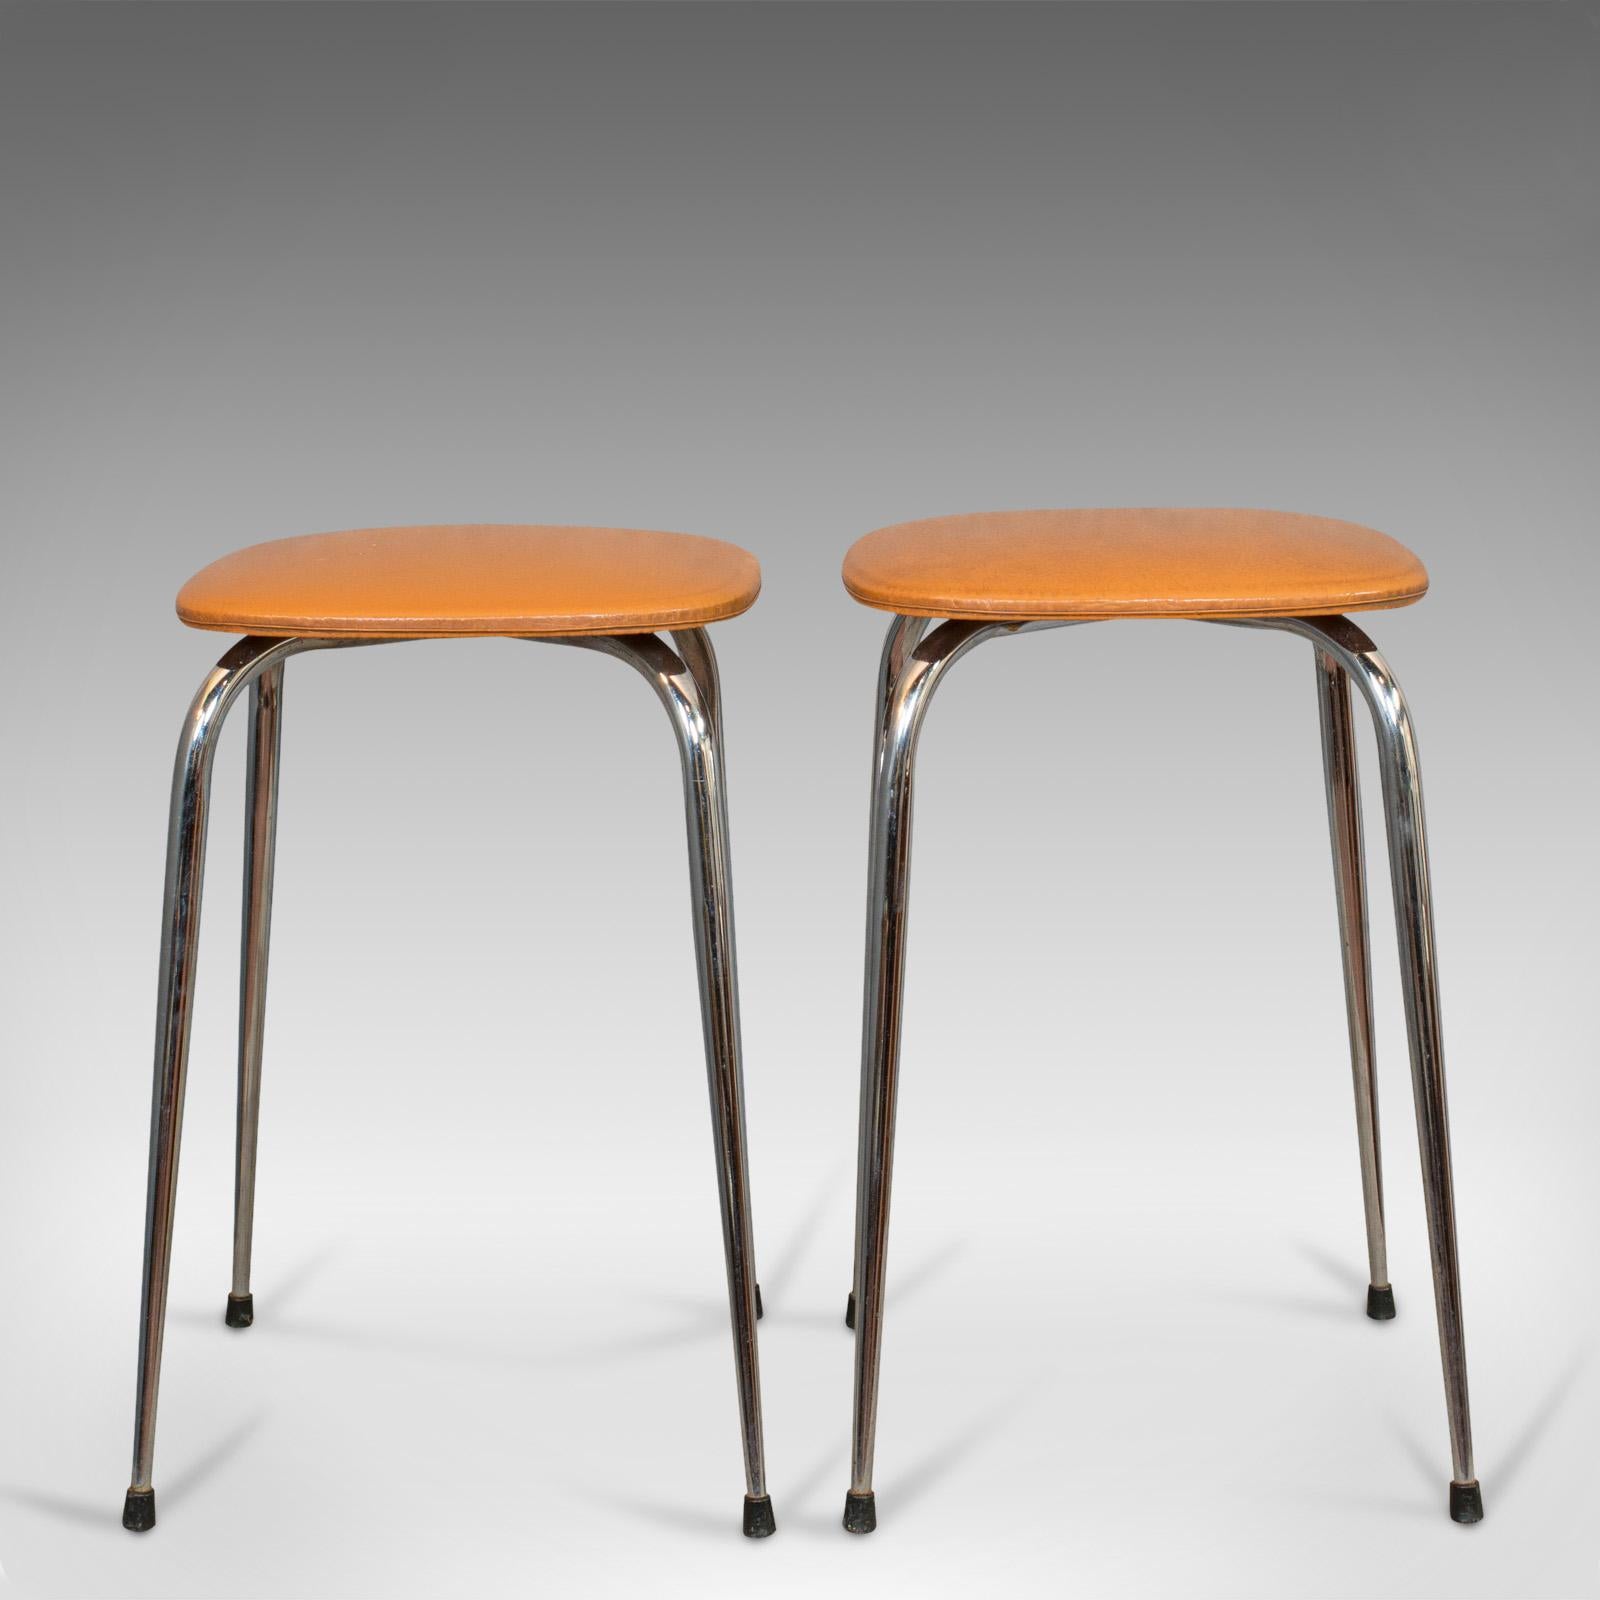 This is a pair of vintage lounge stools. A French, leatherette 1960s stool, dating the mid-20th century, circa 1960.

Add some French lounge chic with these vibrant 1960s stools
Displaying a desirable aged patina
Soft, tan leatherette in good